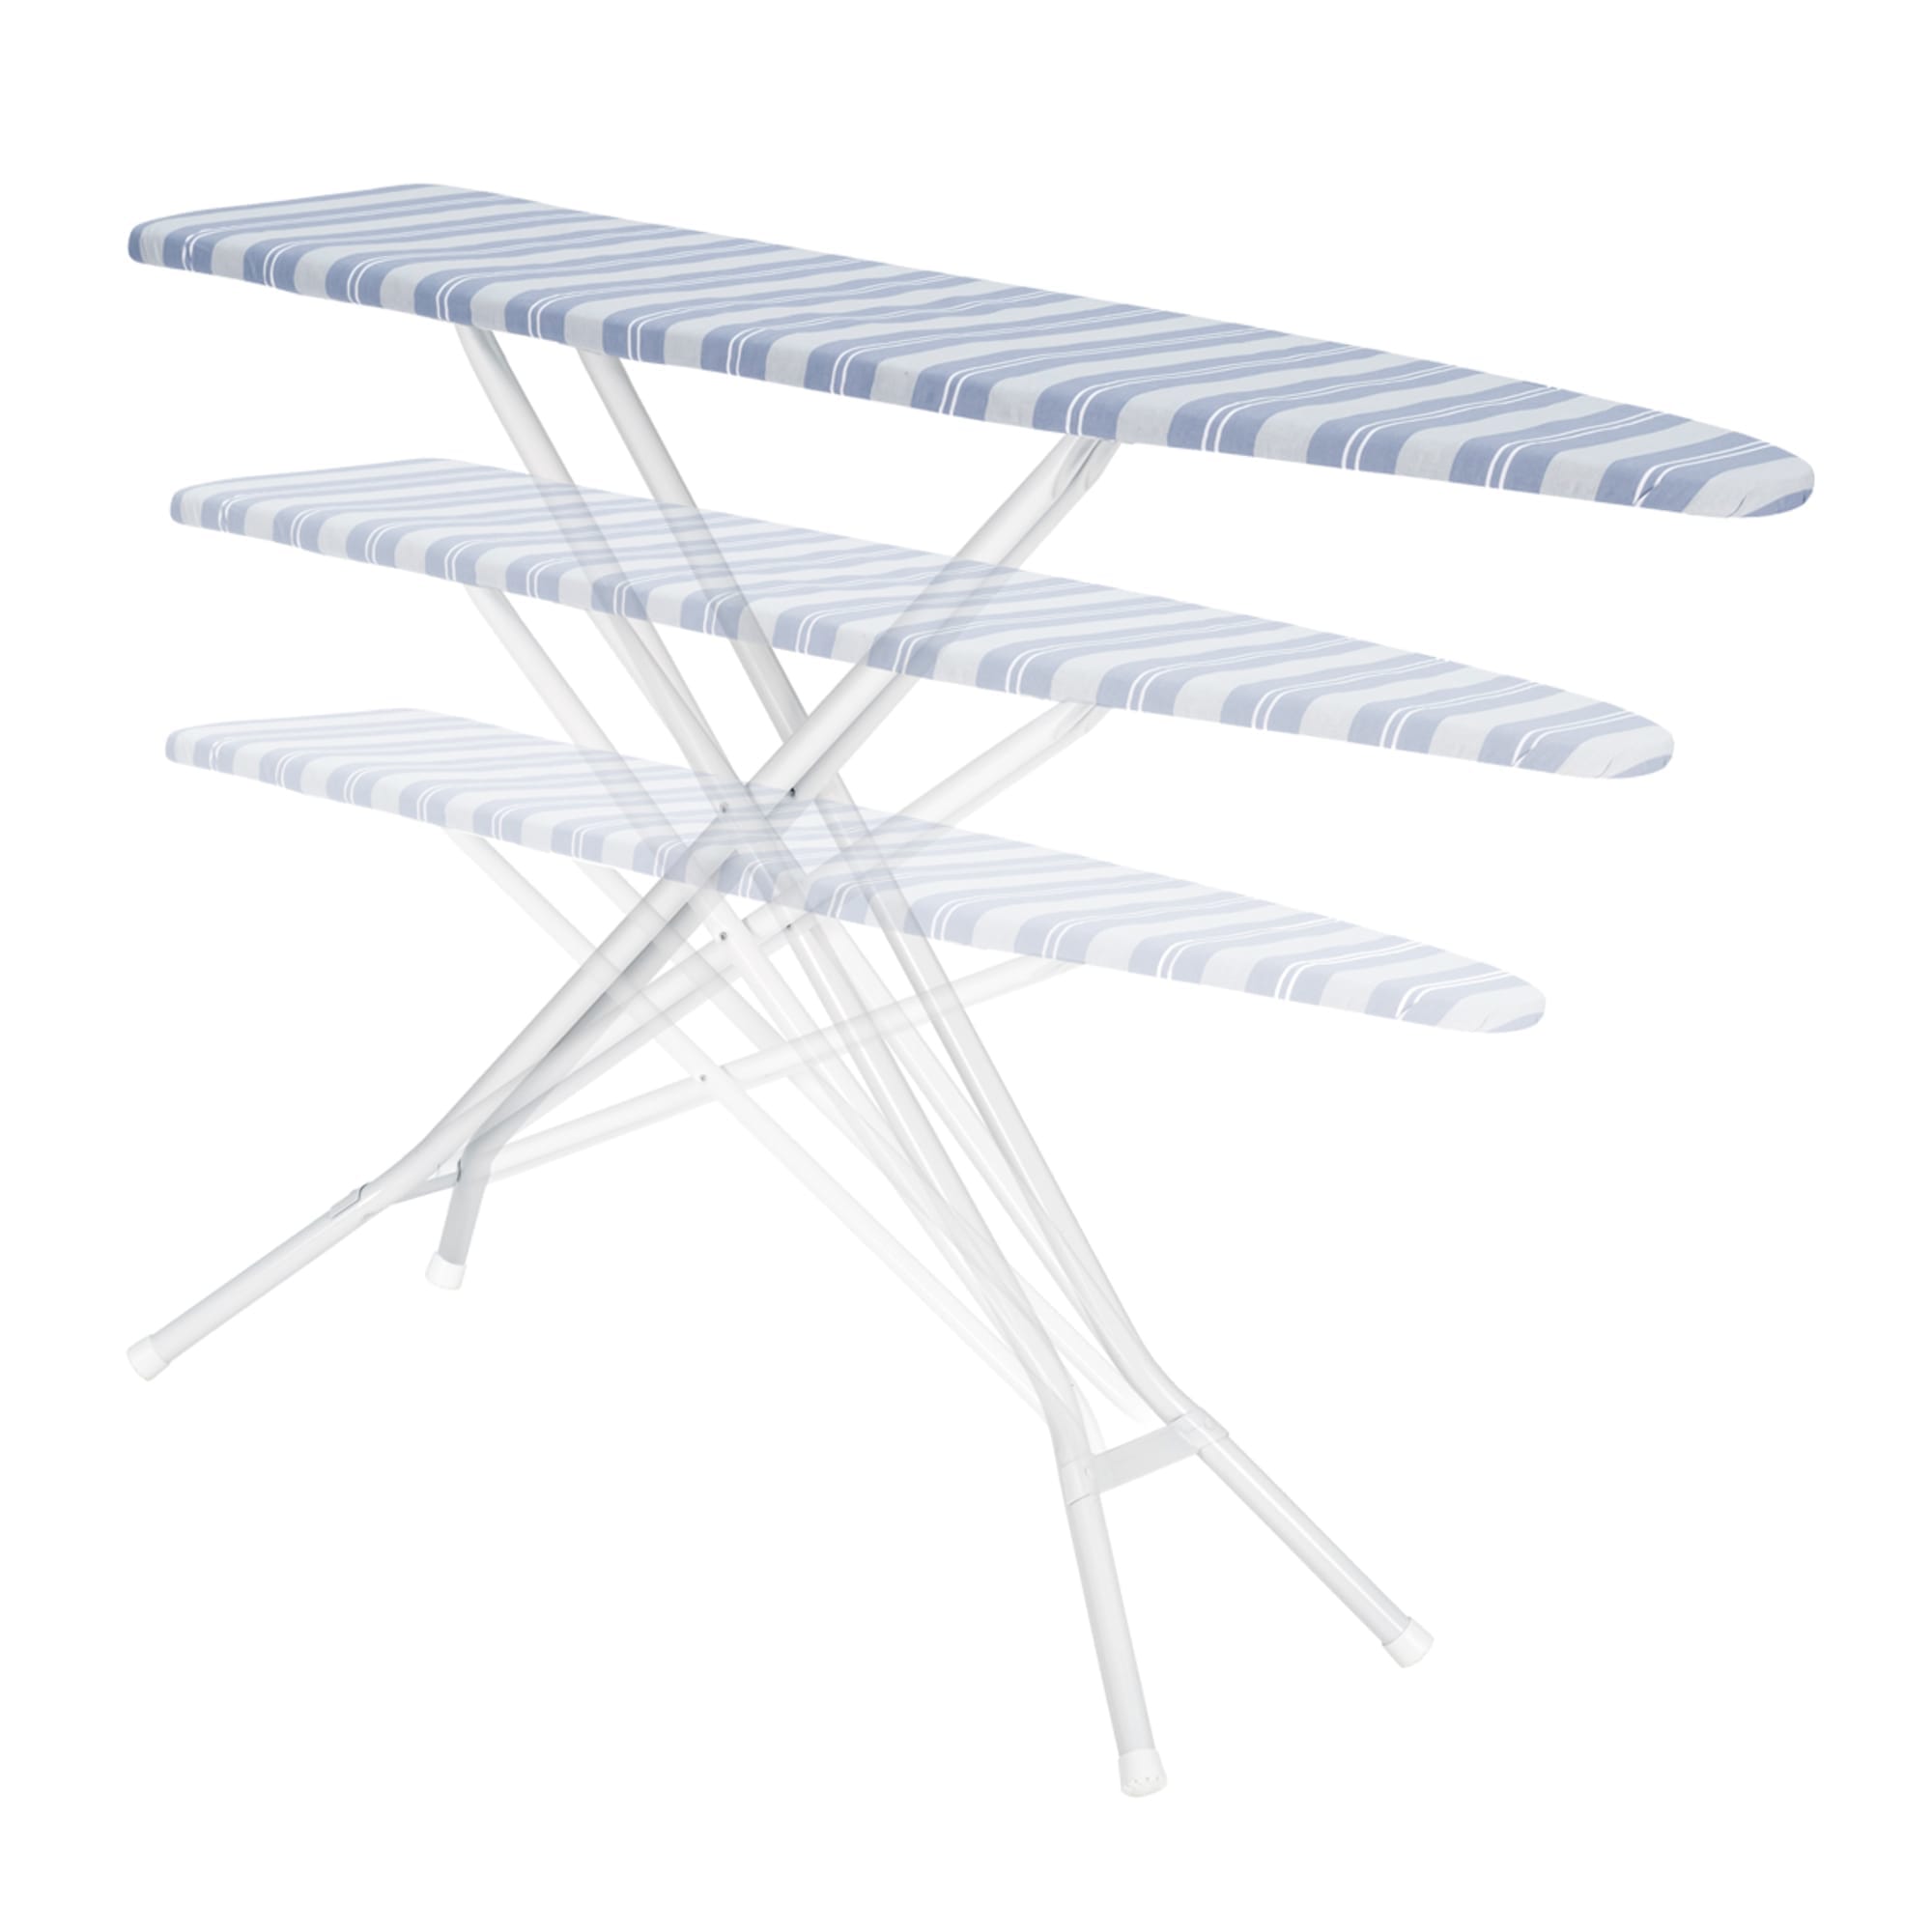 Seymour Home Products Adjustable Height, 4-Leg Ironing Board With Perforated Top, Blue Stripe (4 Pack) $30.00 EACH, CASE PACK OF 4